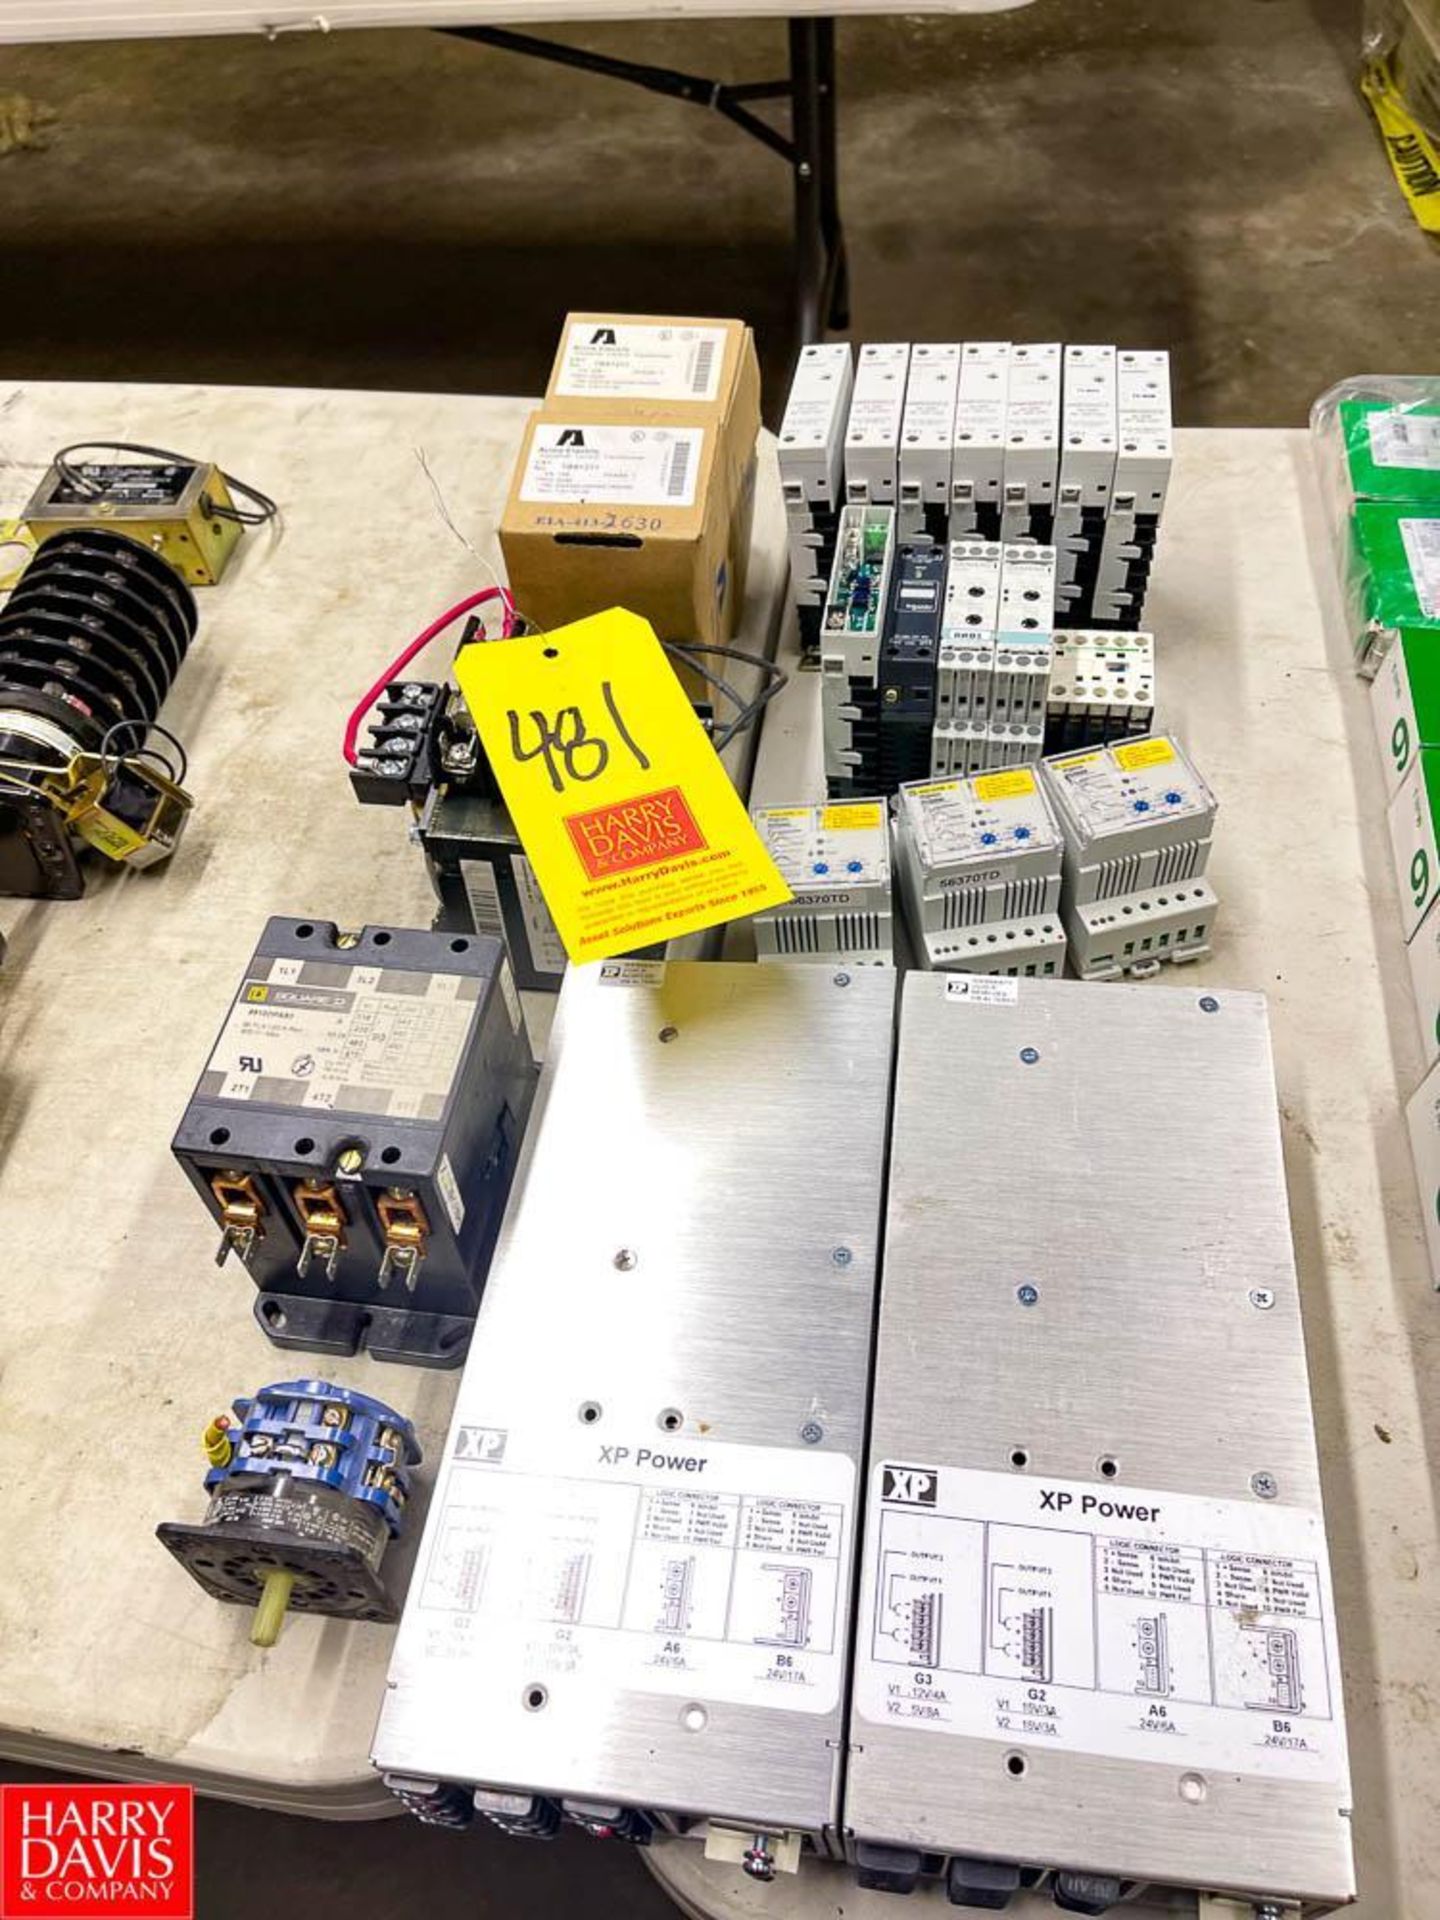 NEW Square D, Acme and Siemens Transformers, Breakers and Power Supplies